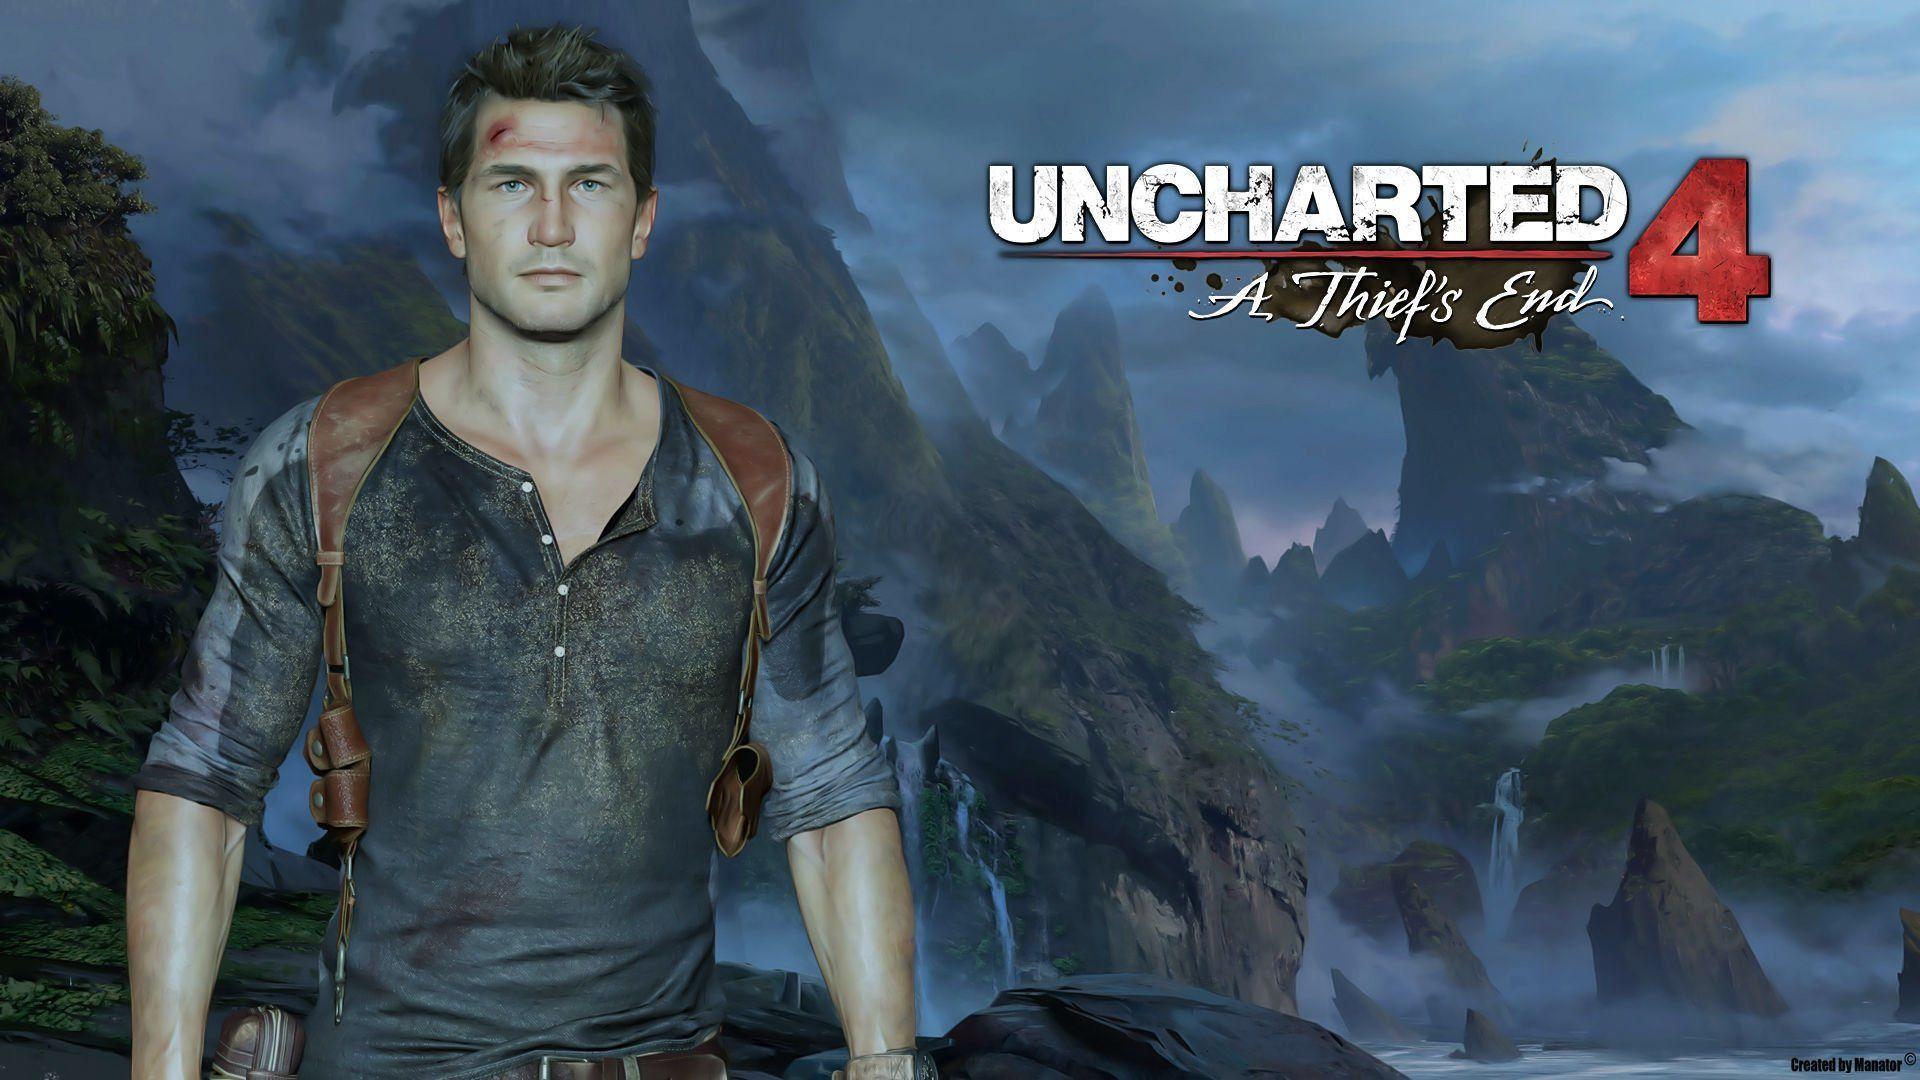 Uncharted 4 A Thiefs End wallpaper